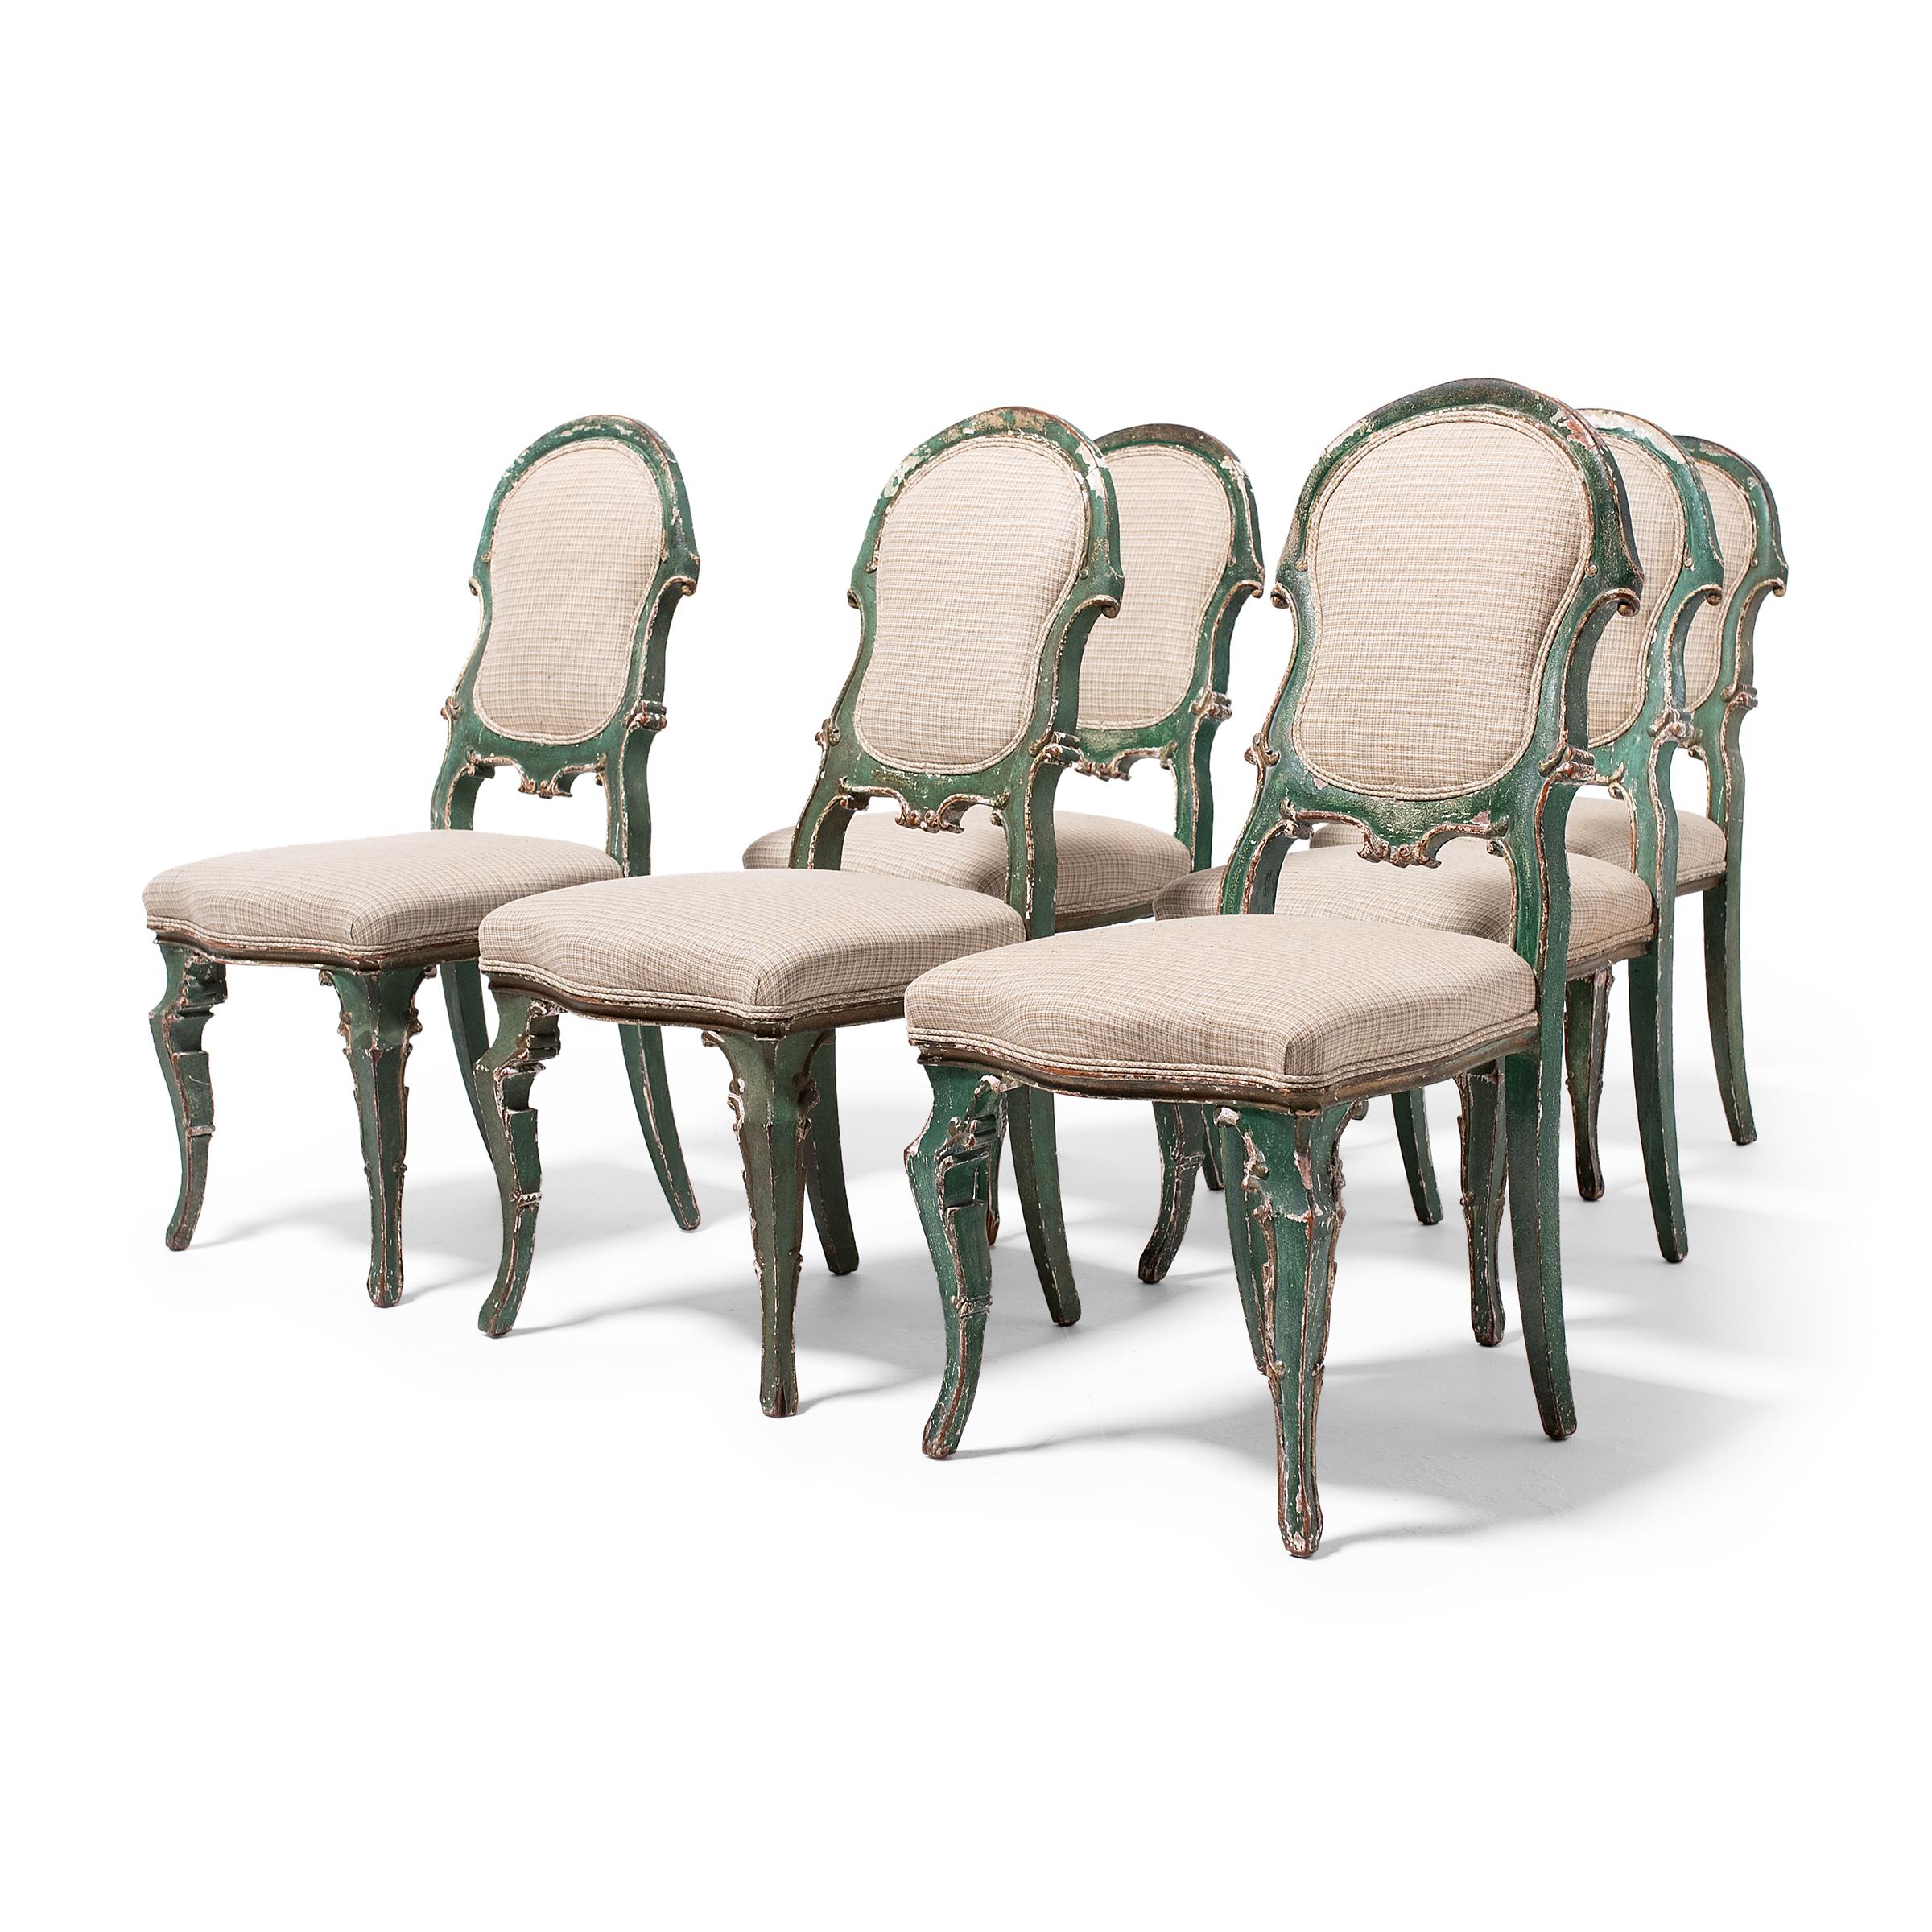 This set of six upholstered dining chairs wonderfully recreates the delicate, feminine seating of 17th and 18th century European furniture, incorporating design elements of Venetian Rococo and Louis XV. Dated to the early 19th century, the chairs